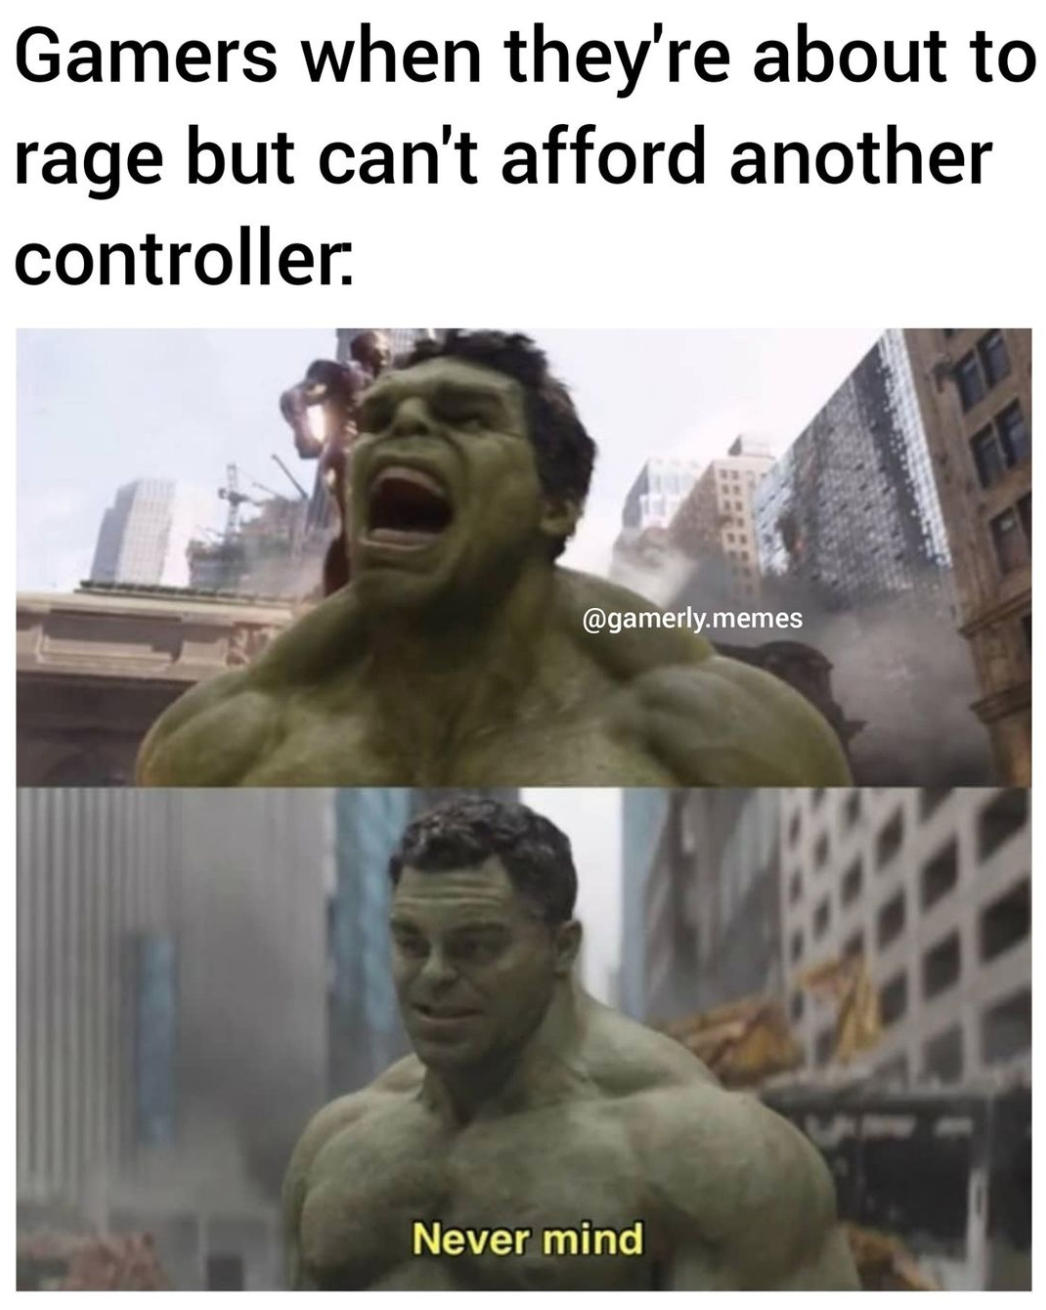 funny gaming memes - raging anger memes - Gamers when they're about to rage but can't afford another controller. .memes Never mind